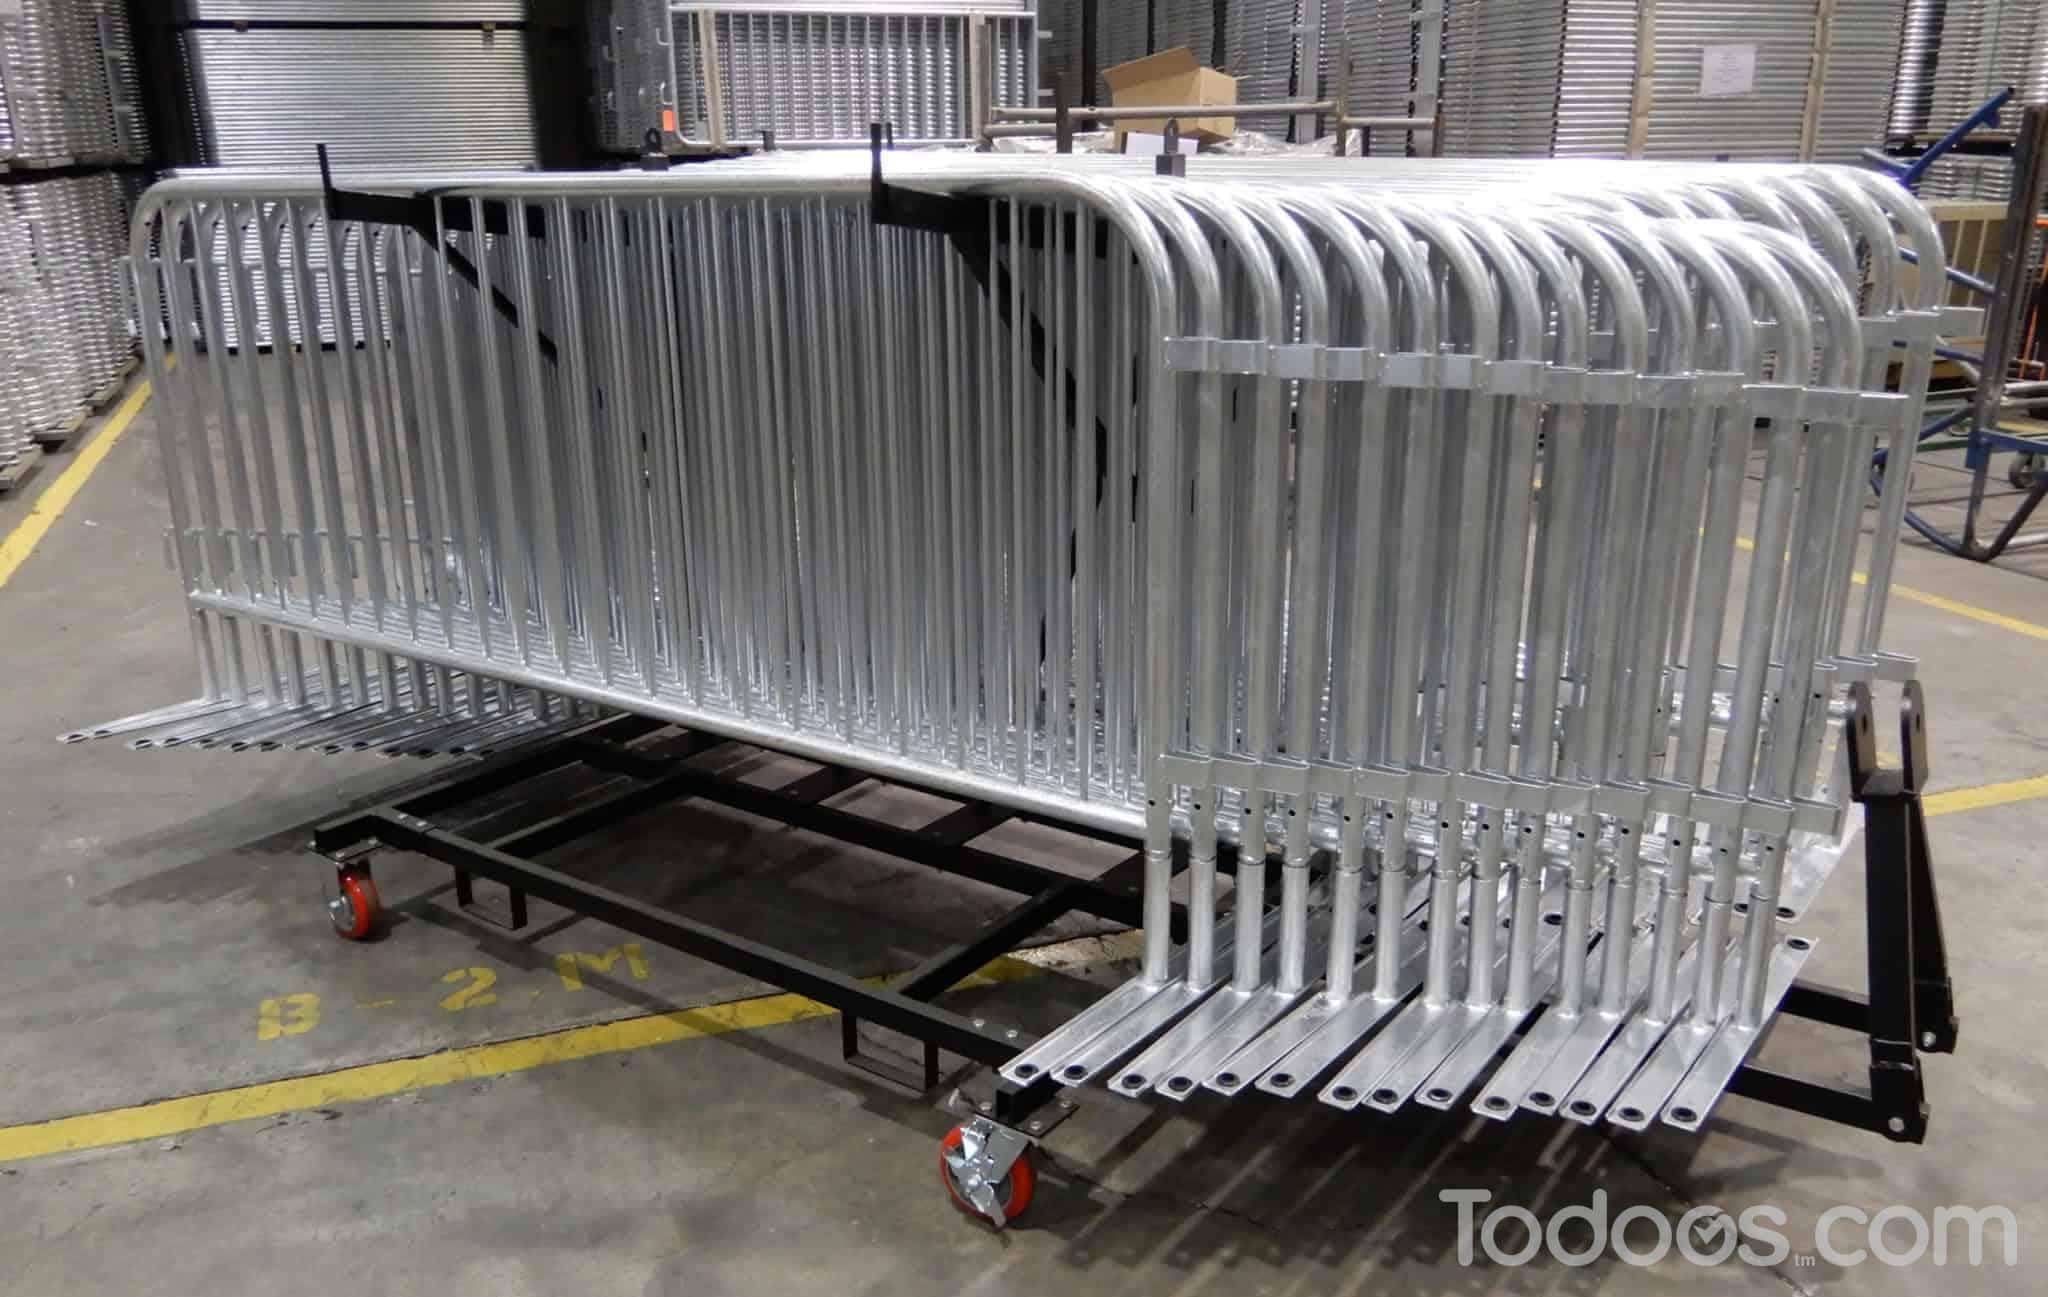 A barricade cart safely transports and stores steel barriers from the warehouse to the action zone – and back.